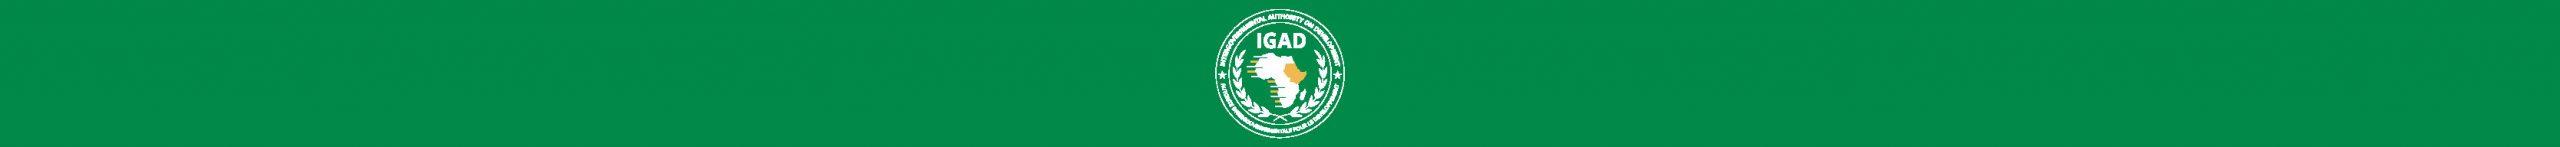 Request For Expression Of Interest (EOI)-Firm For Consulting Service Of The Development Of IGAD Partnership Strategy And IGAD Resource Mobilization Strategy